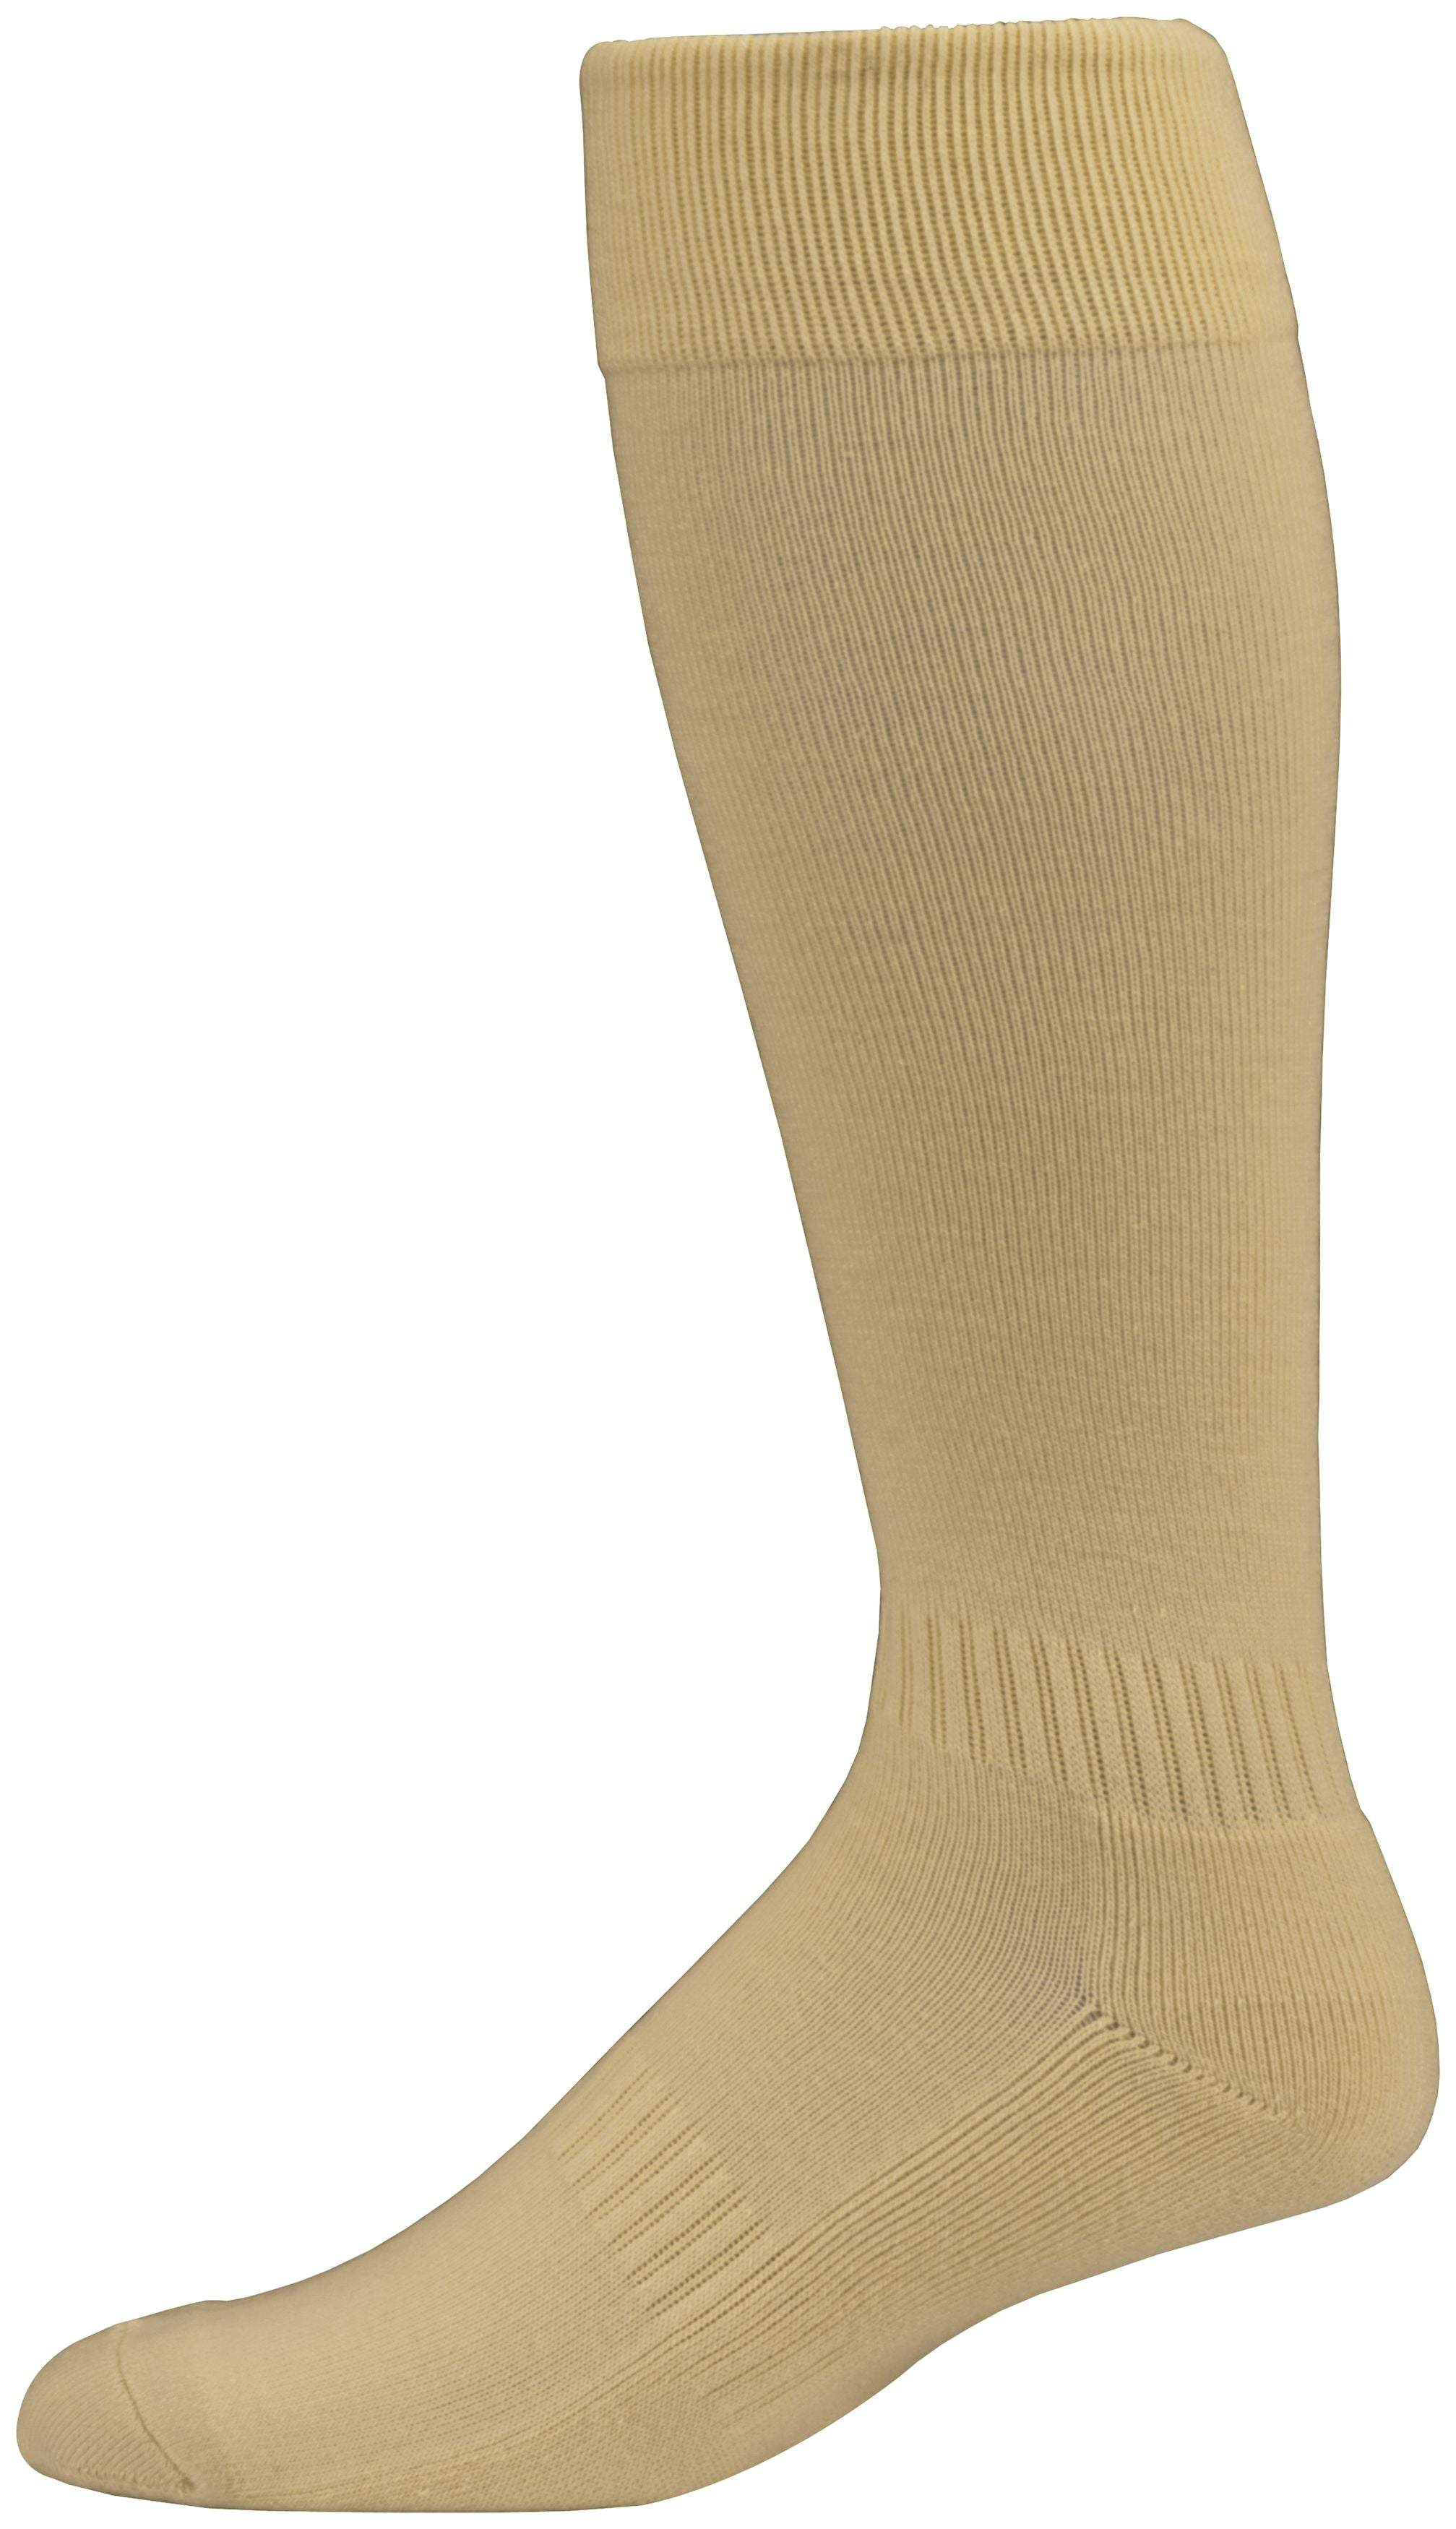 Augusta Sportswear Elite Multi-Sport Sock in Vegas Gold  -Part of the Accessories, Augusta-Products, Accessories-Socks product lines at KanaleyCreations.com